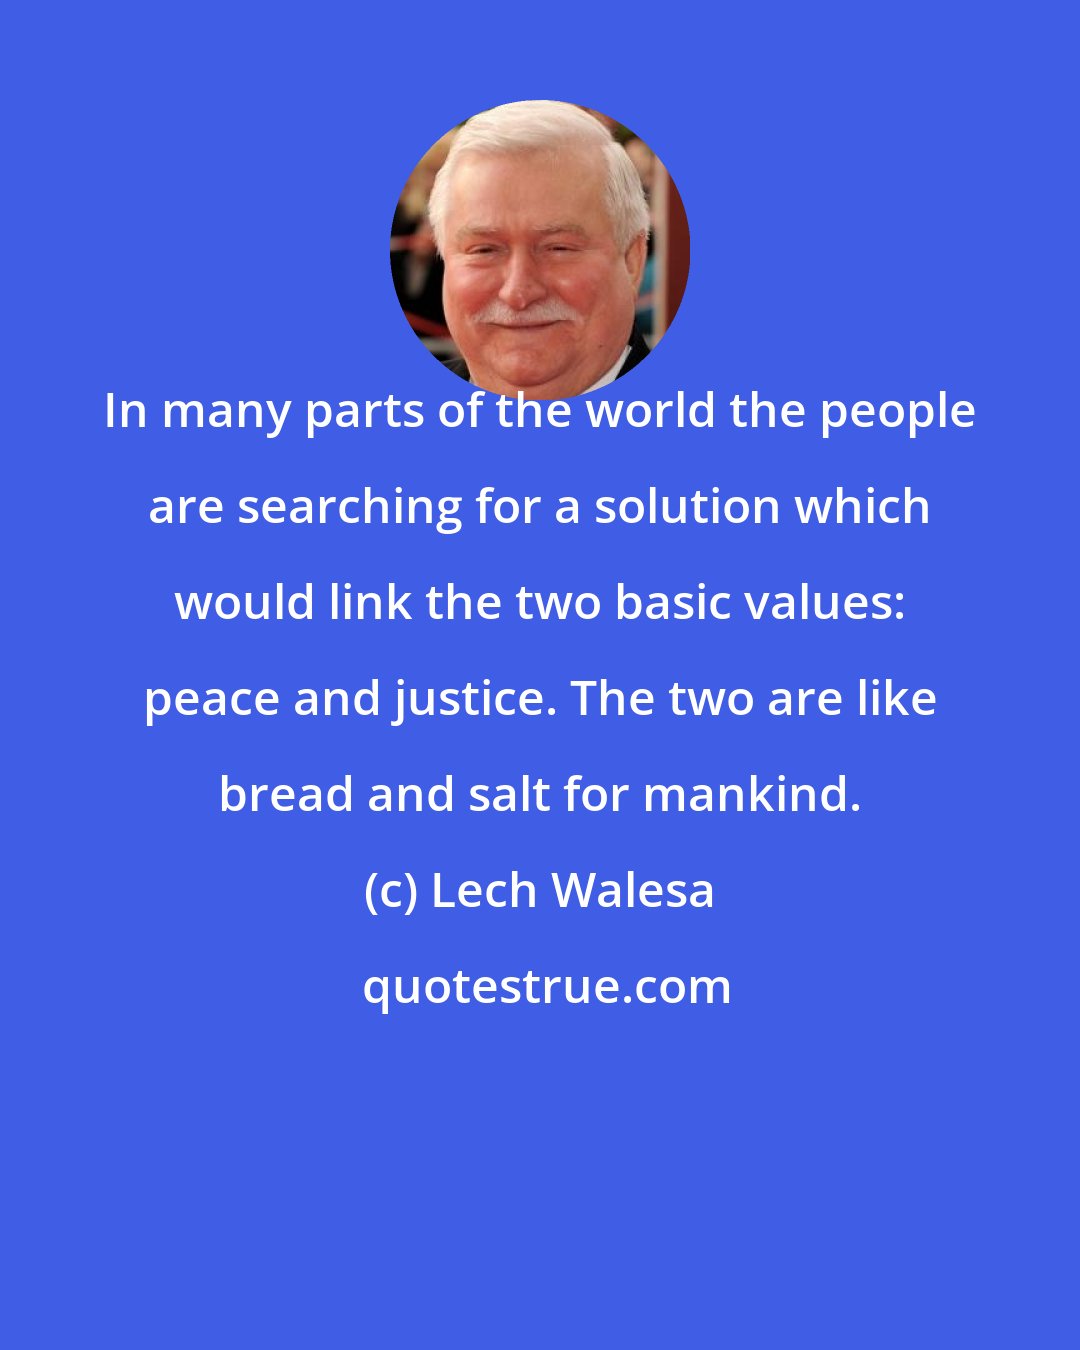 Lech Walesa: In many parts of the world the people are searching for a solution which would link the two basic values: peace and justice. The two are like bread and salt for mankind.